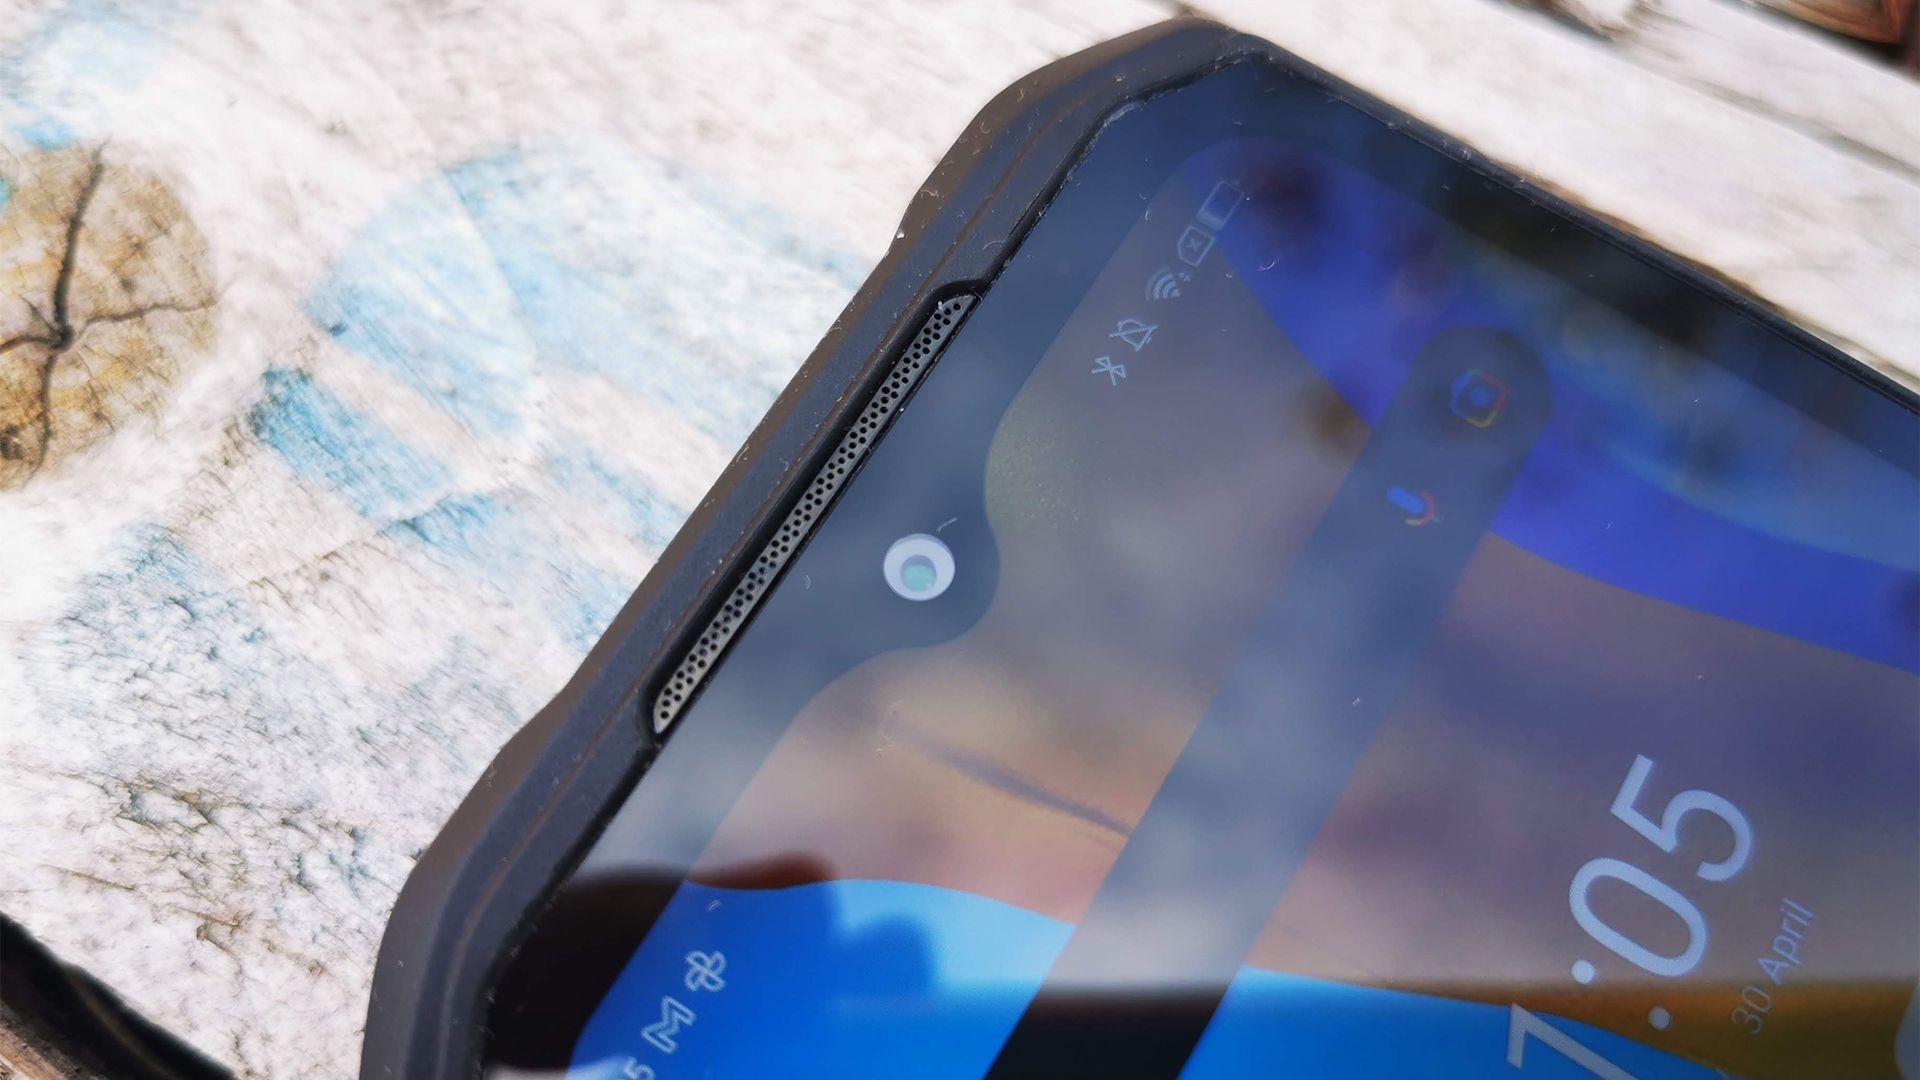 Review: The Doogee S98 Pro is a rugged smartphone with Thermal and Night  Vision - Neowin